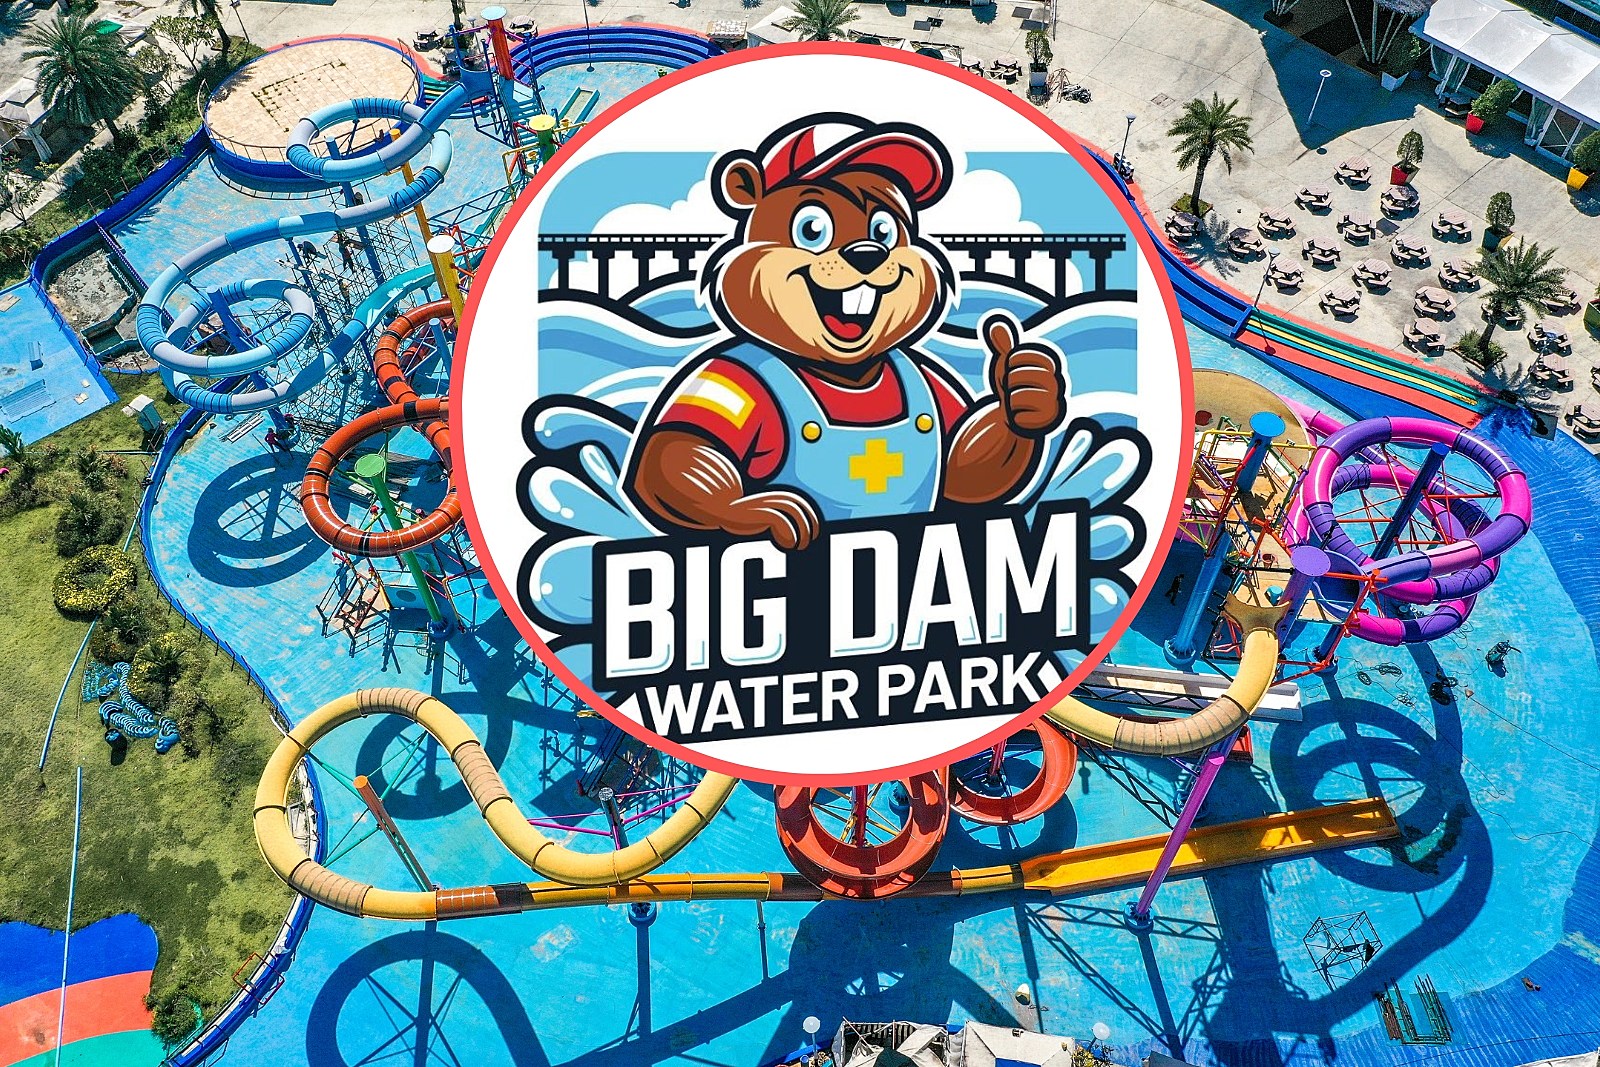 Texarkana's Water Park Under New Management, New Name & More